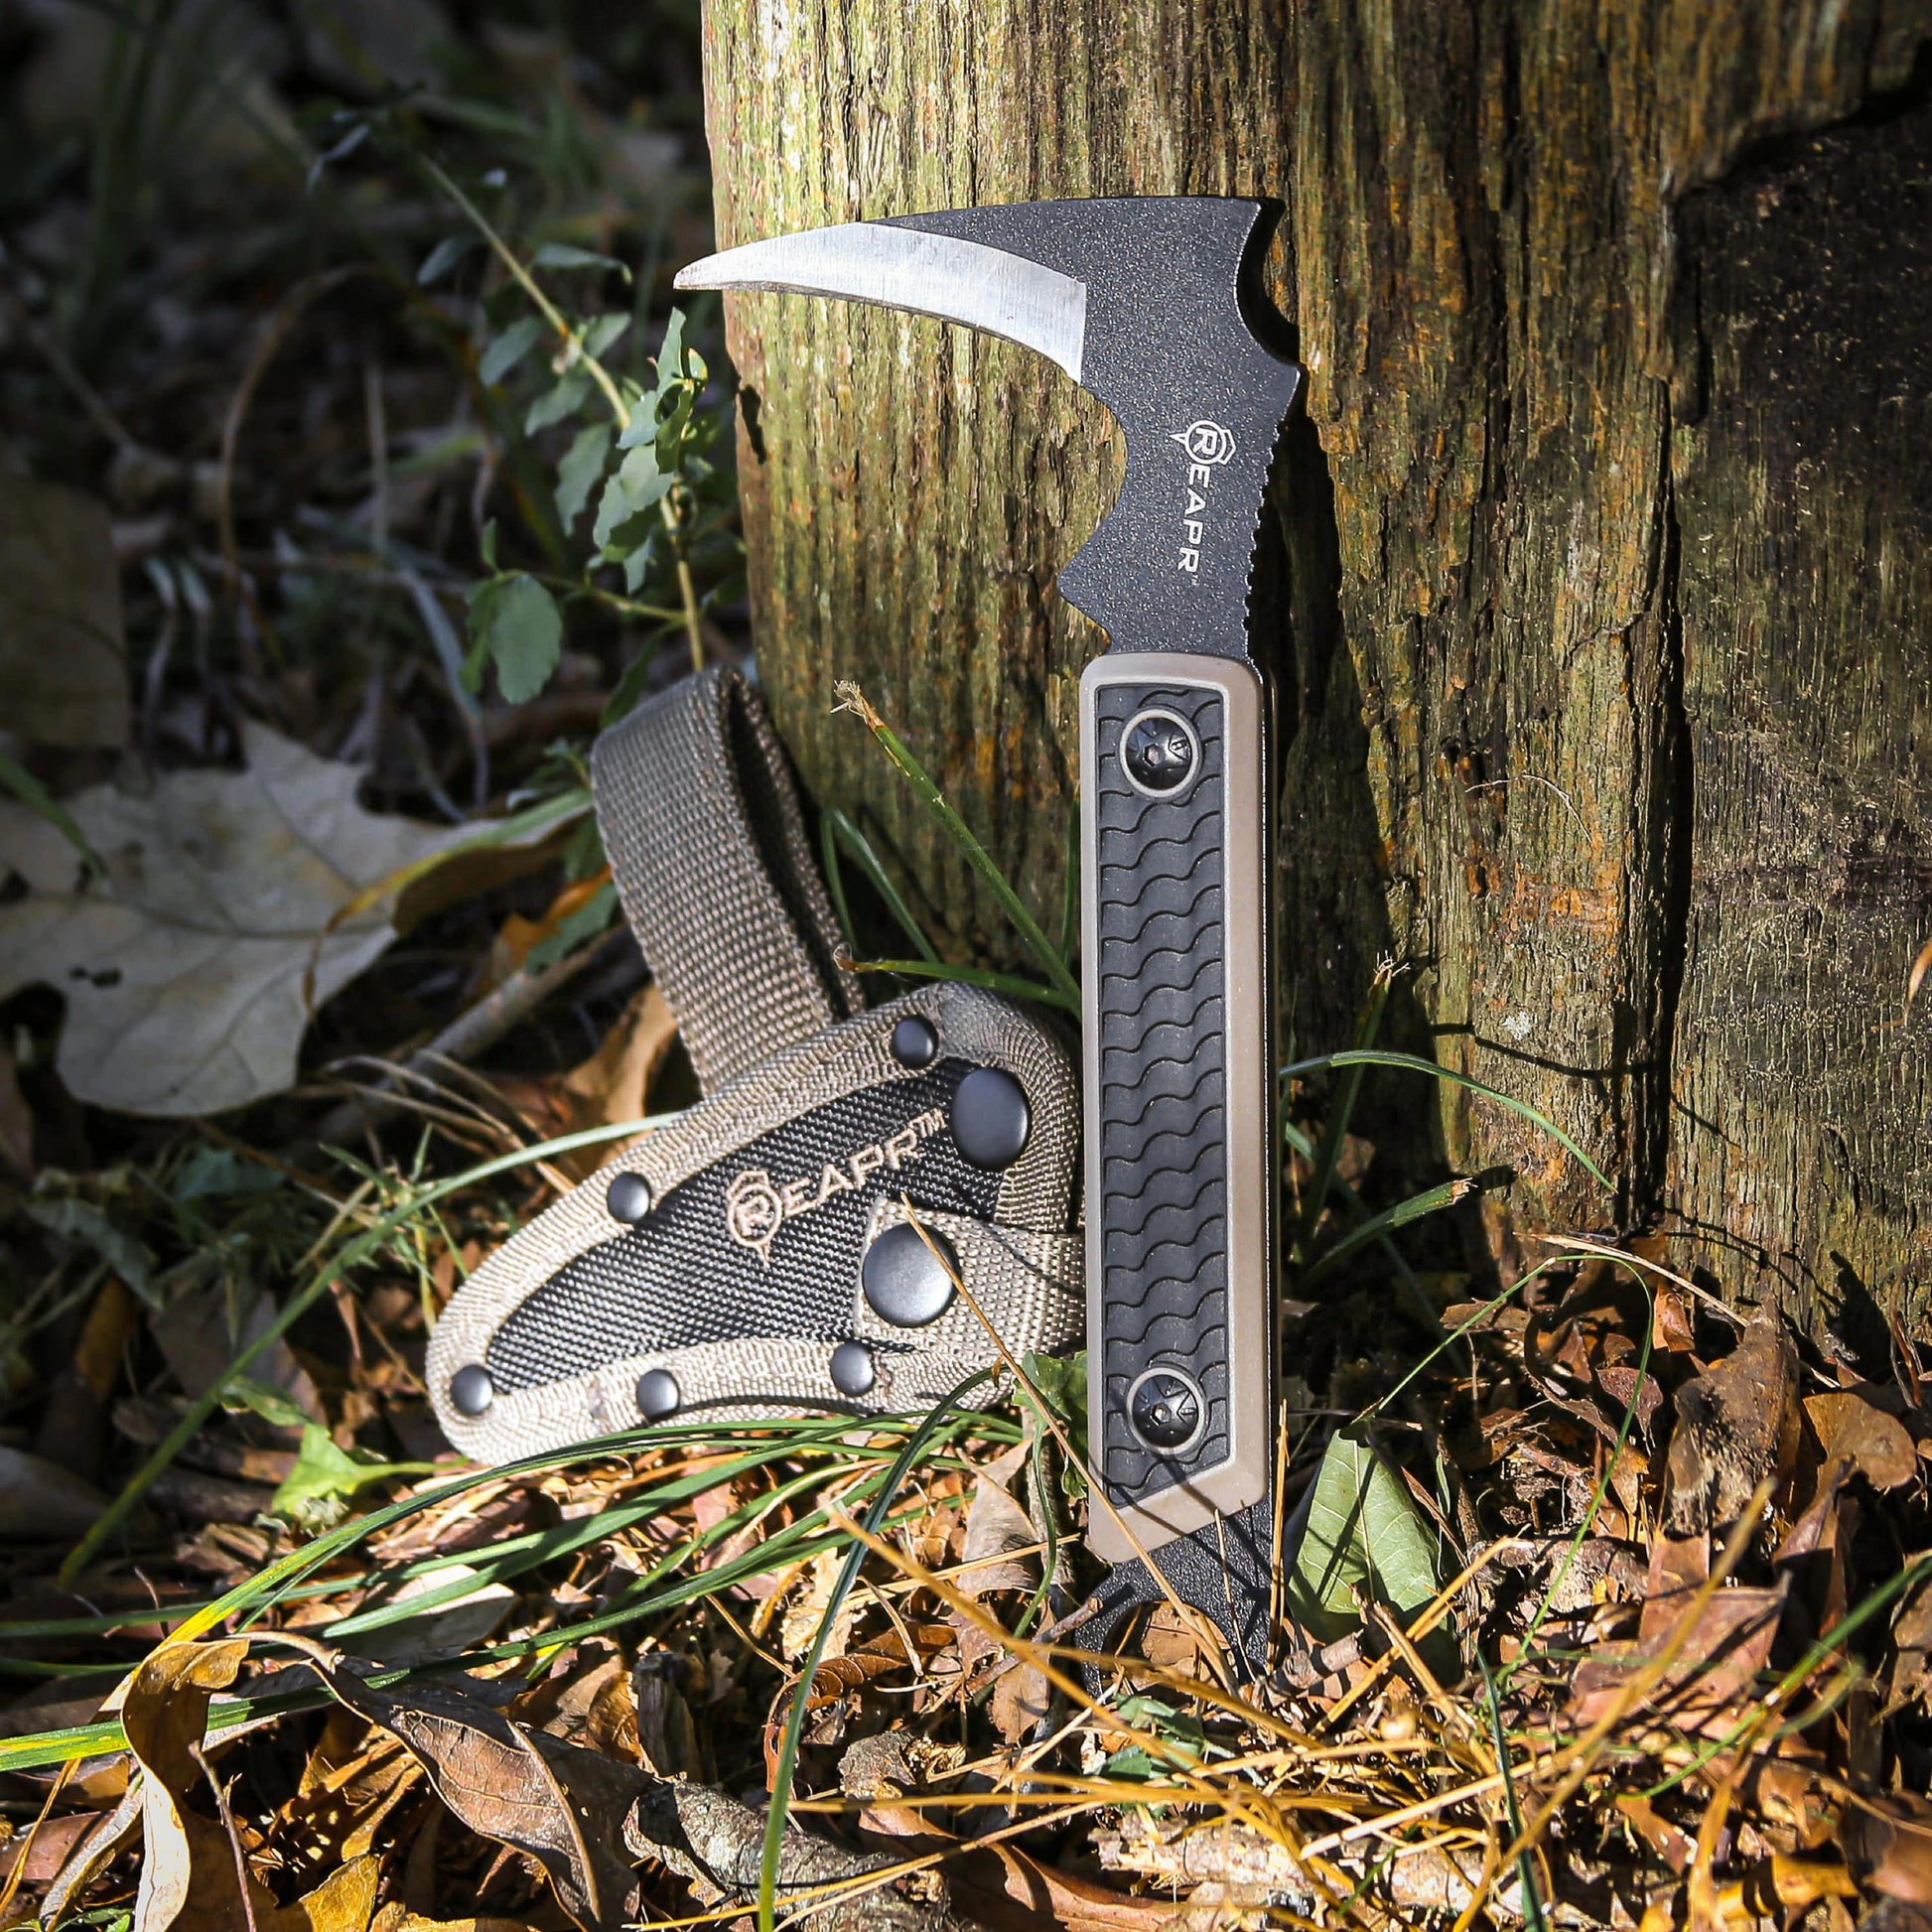 There aren’t too many cutting tasks the Versa Karambit can’t tackle with ease. The 3-1/2” full-tang talon blade will&nbsp;cut through cut nylon strapping, canvas and heavy materials without hesitation while the powder-coated 420 stainless steel construction is strong, sturdy and ideal for re-sharpening when the time comes. www.defenceqstore.com.au